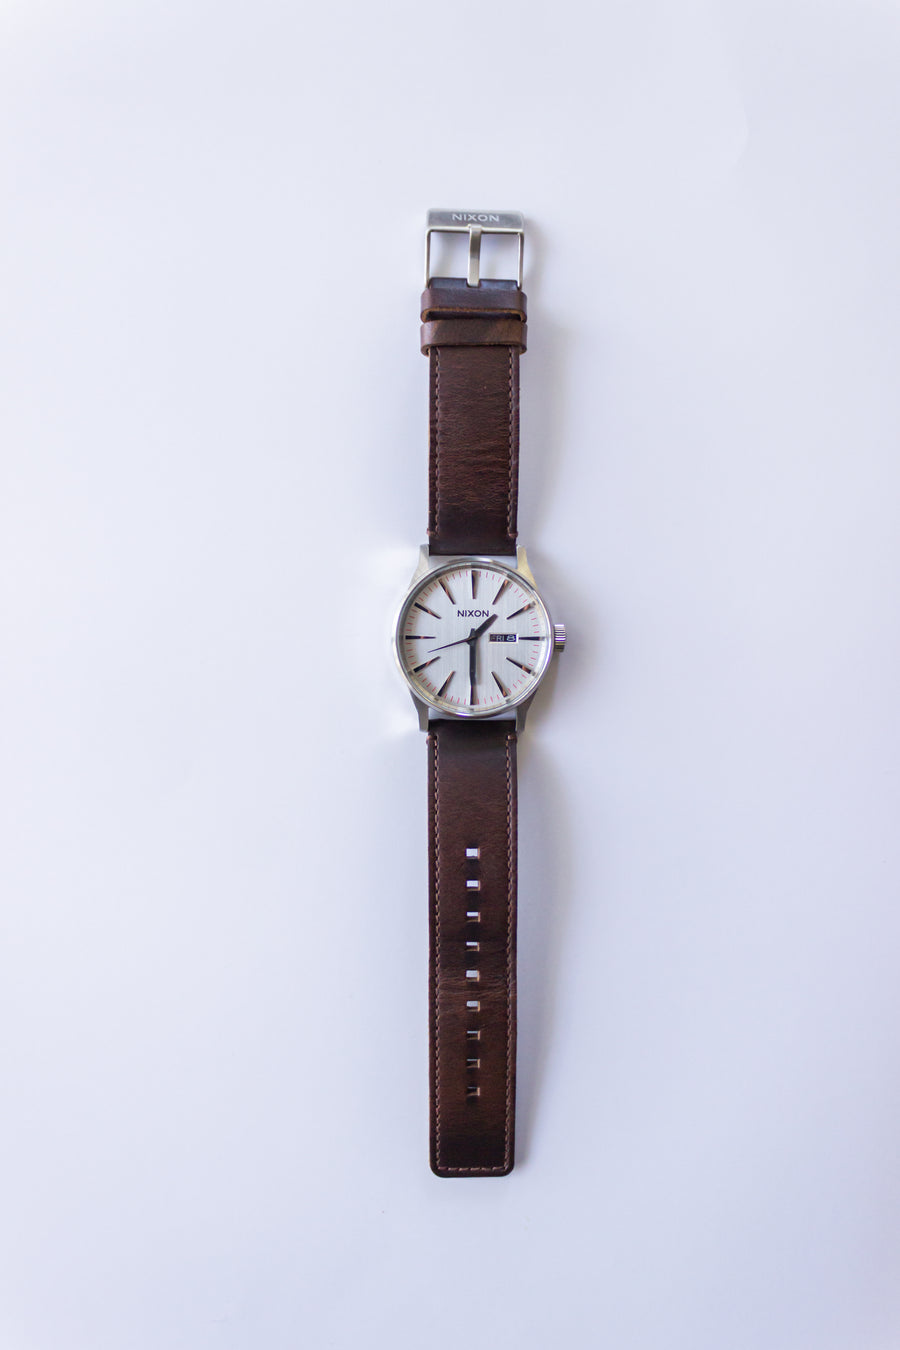 NIXON SENTRY LEATHER WATCH - SILVER/ BROWN